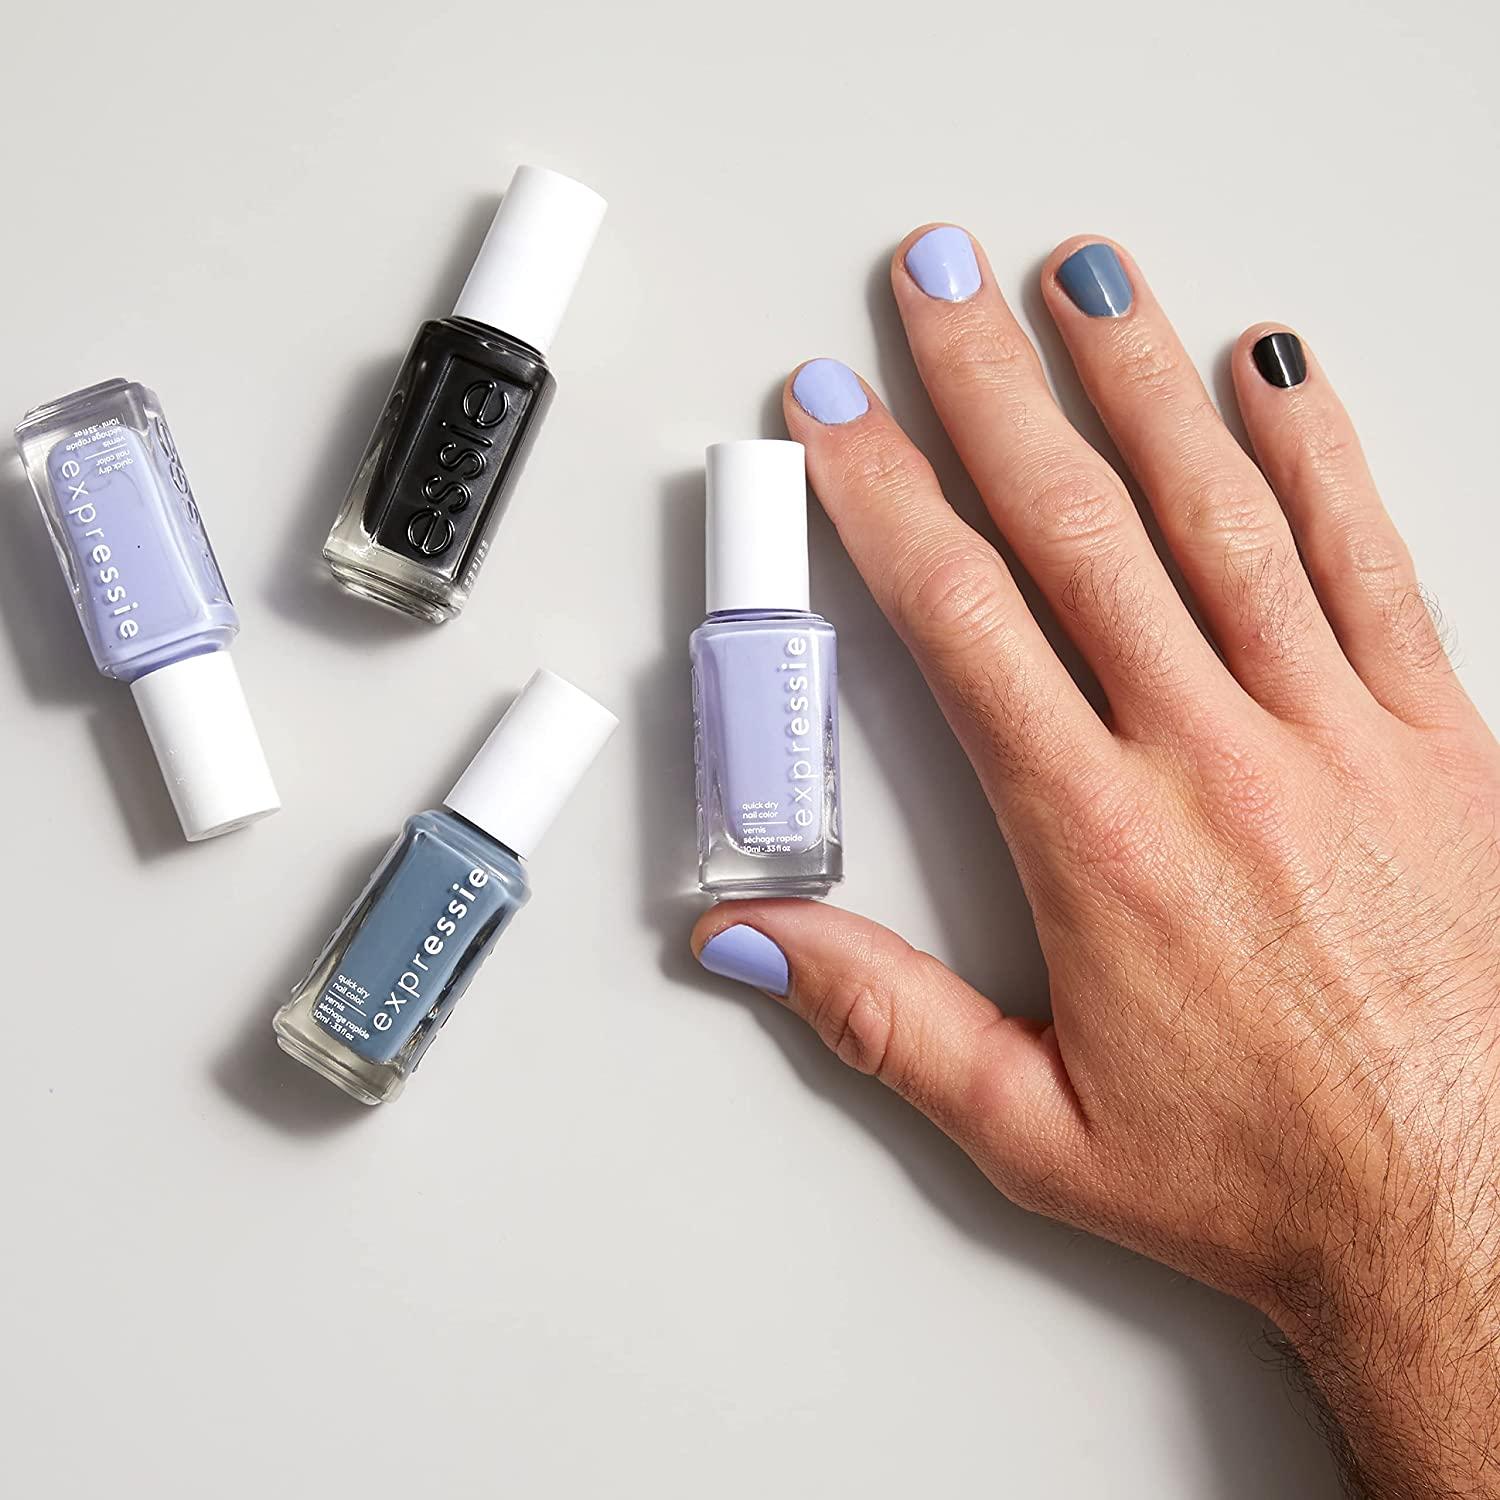 essie expressie Quick-Dry Nail (Pack Sk8 1) Vegan, Fl undertones) 0.33 Lilac, (lilac sk8 blue Polish, Oz with destiny Destiny, 8-Free with Sk8 0.33 356 with Destiny, with of Ounce